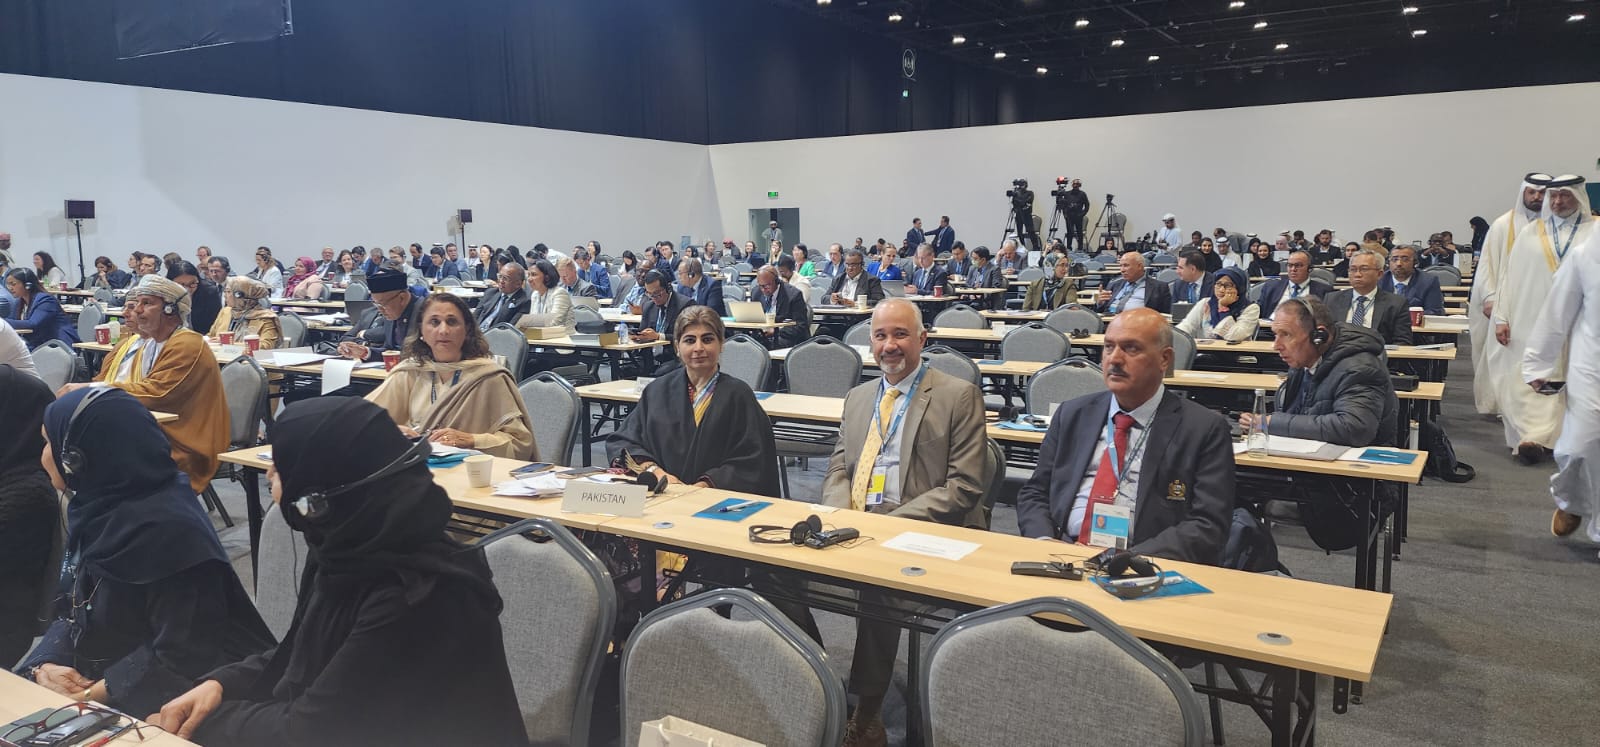 A delegation from the Senate of Pakistan, spearheaded by Senator Saadia Abbasi, participated in a session of the World Trade Organization (WTO) parliamentary conference held in Abu Dhabi, UAE.